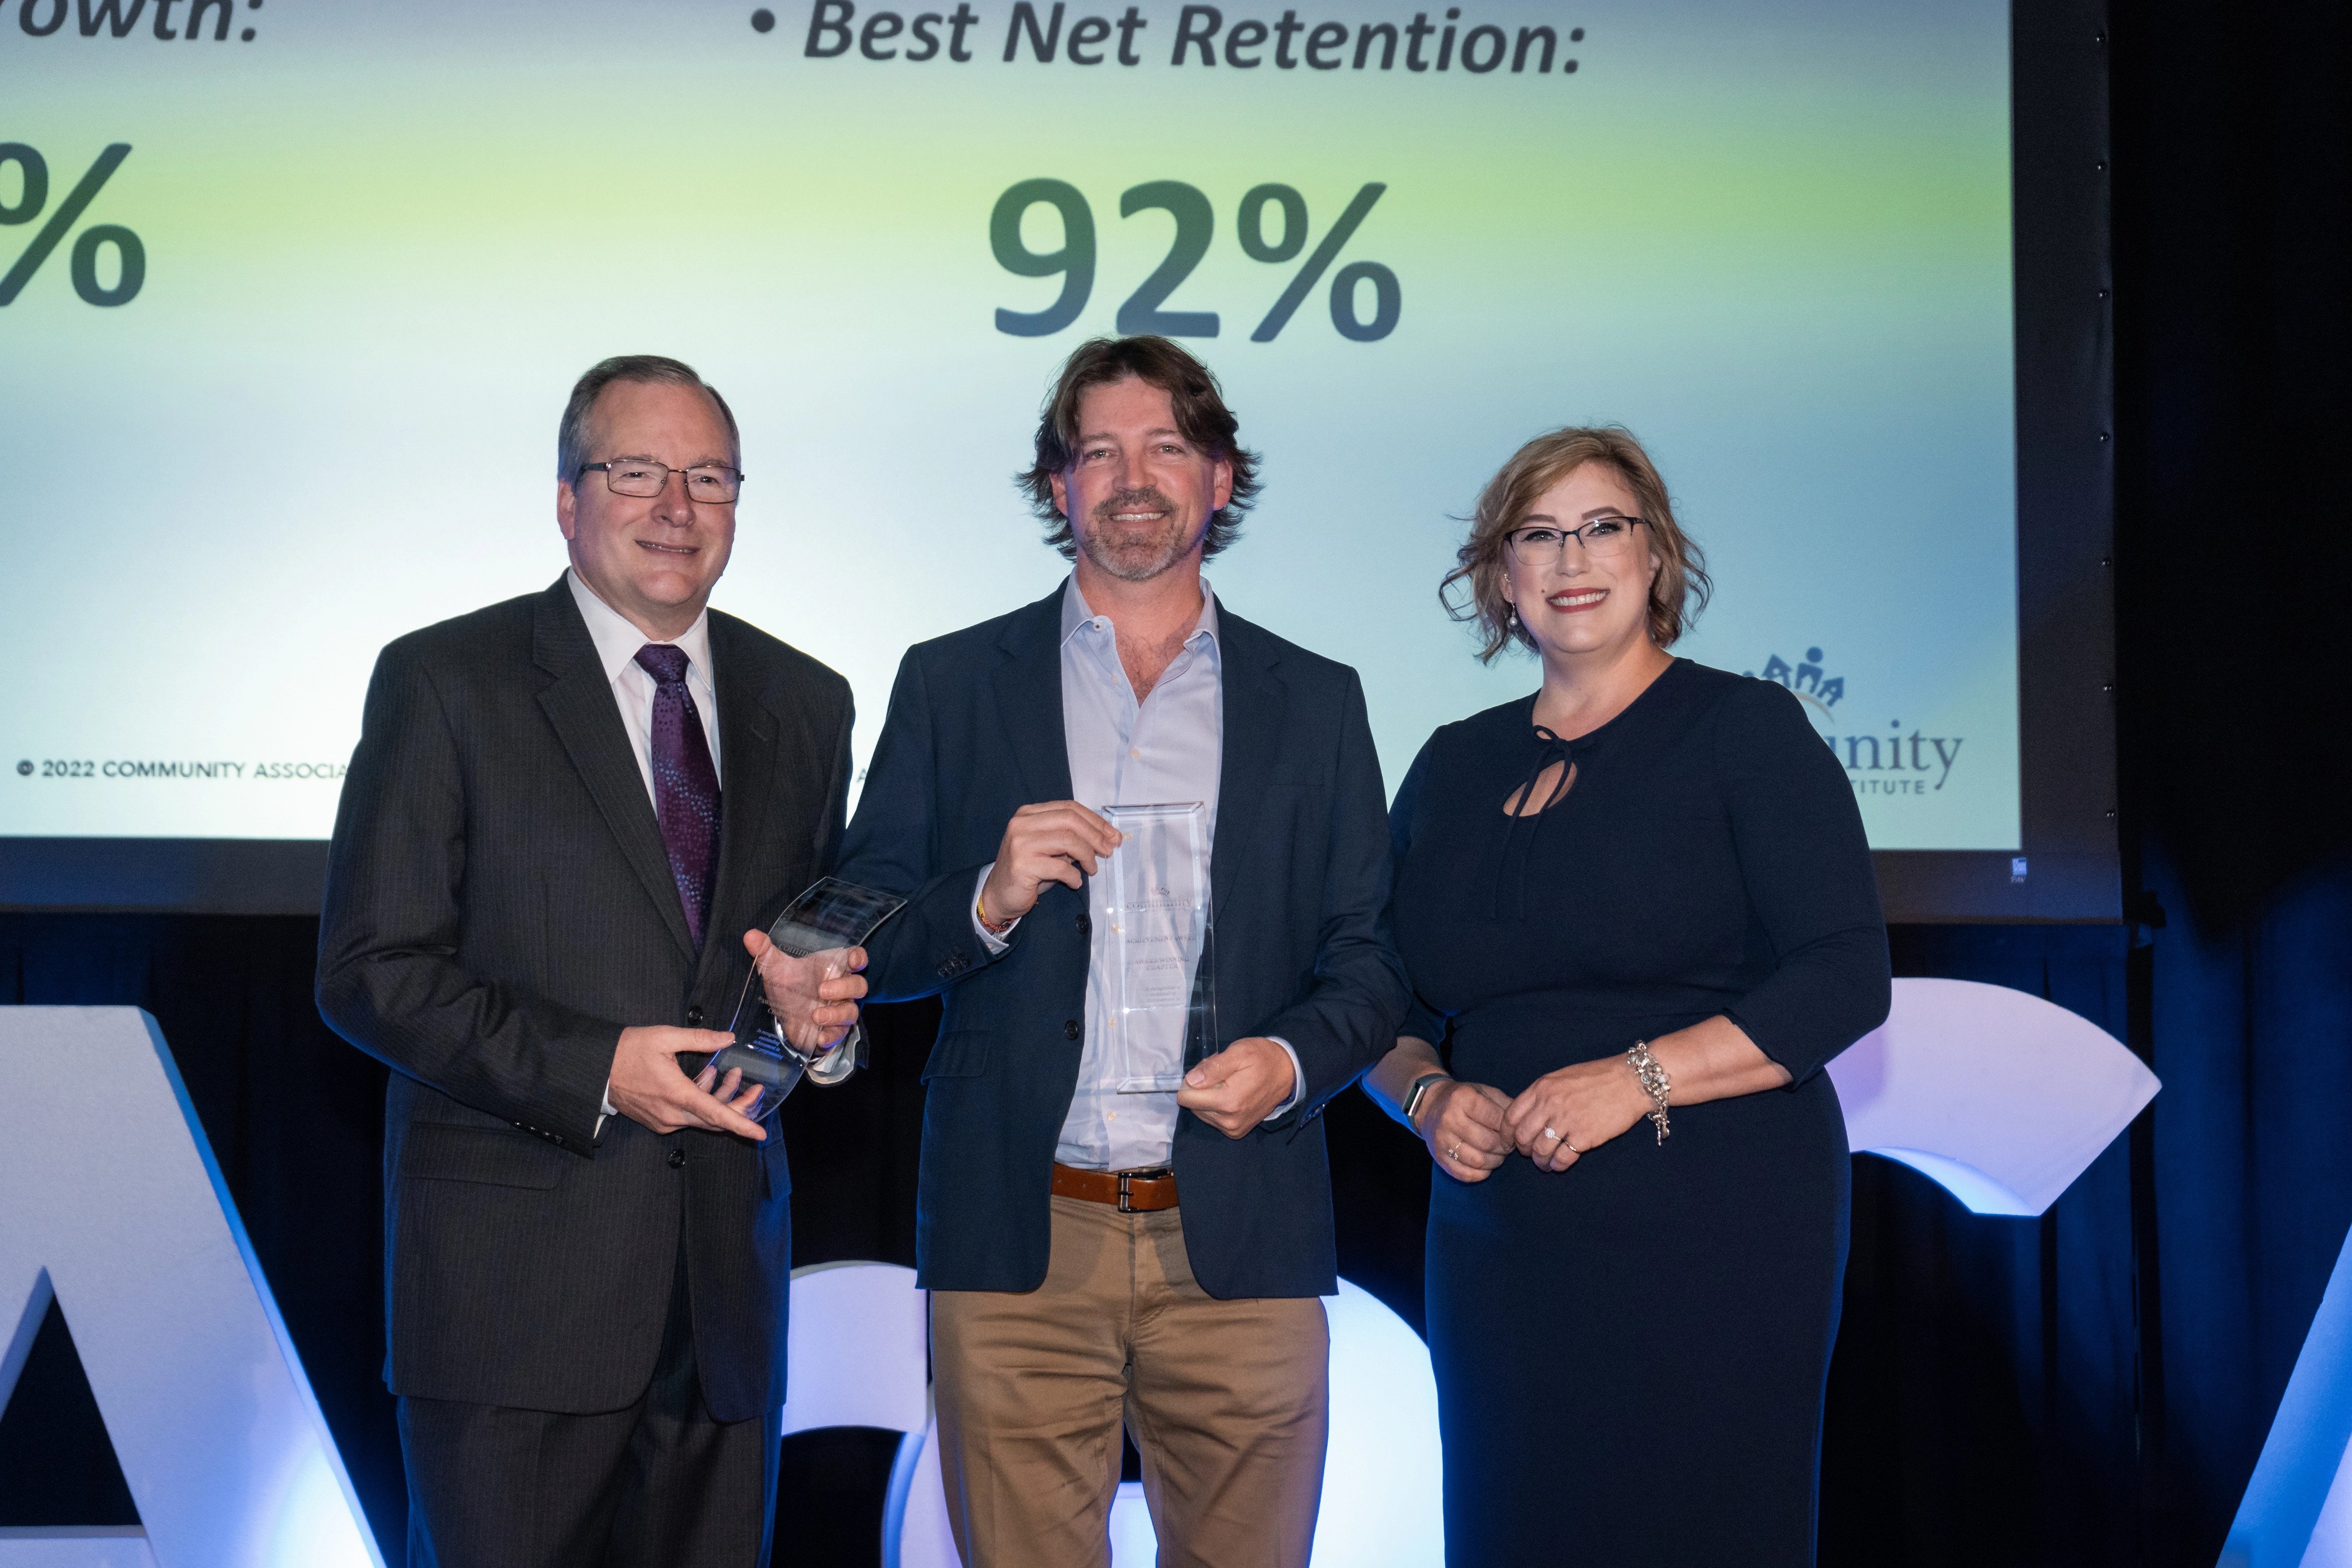 Pictured: Tom Skiba, CAI-National CEO with Ryan Gesell, CIRMS, CMCA, 2022 Chapter President-Elect, and Jessica Towles, 2022 National President accepting the awards at CAI-National’s Annual Conference. 